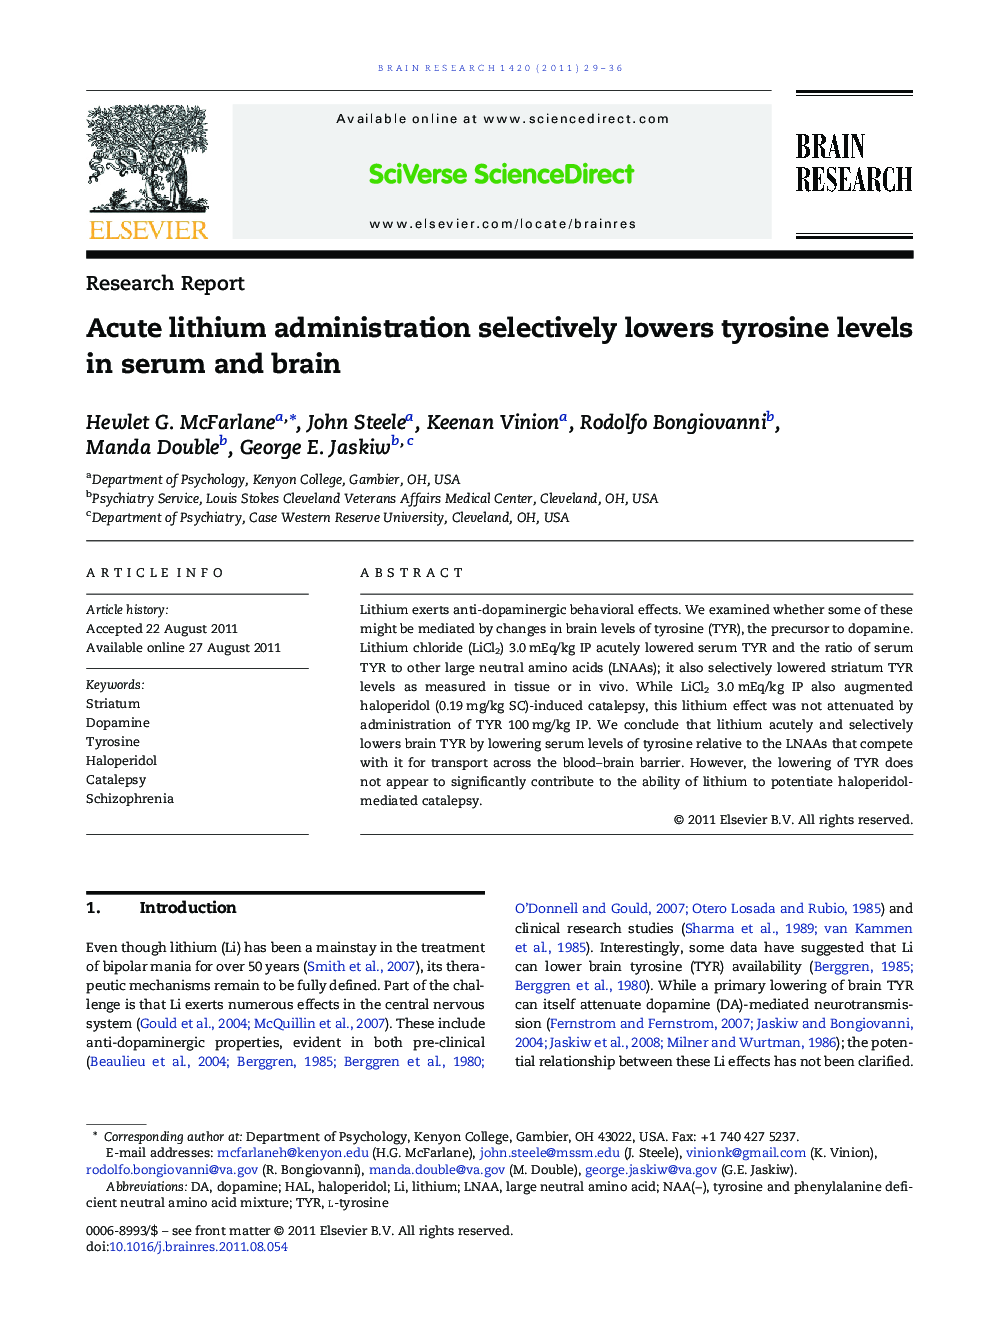 Acute lithium administration selectively lowers tyrosine levels in serum and brain